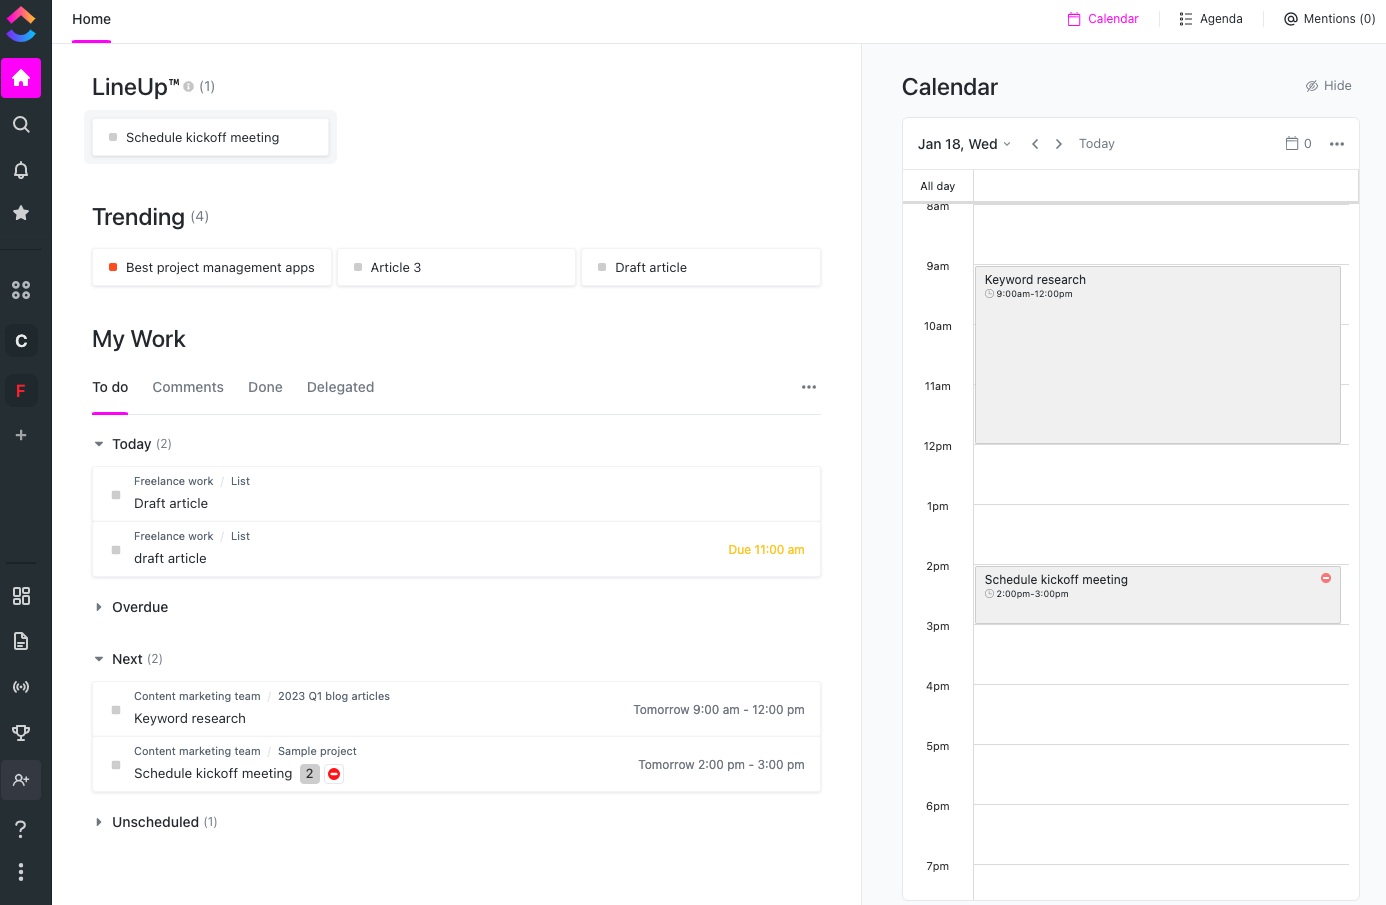 ClickUp, our pick for the best enterprise project management software for remote teams